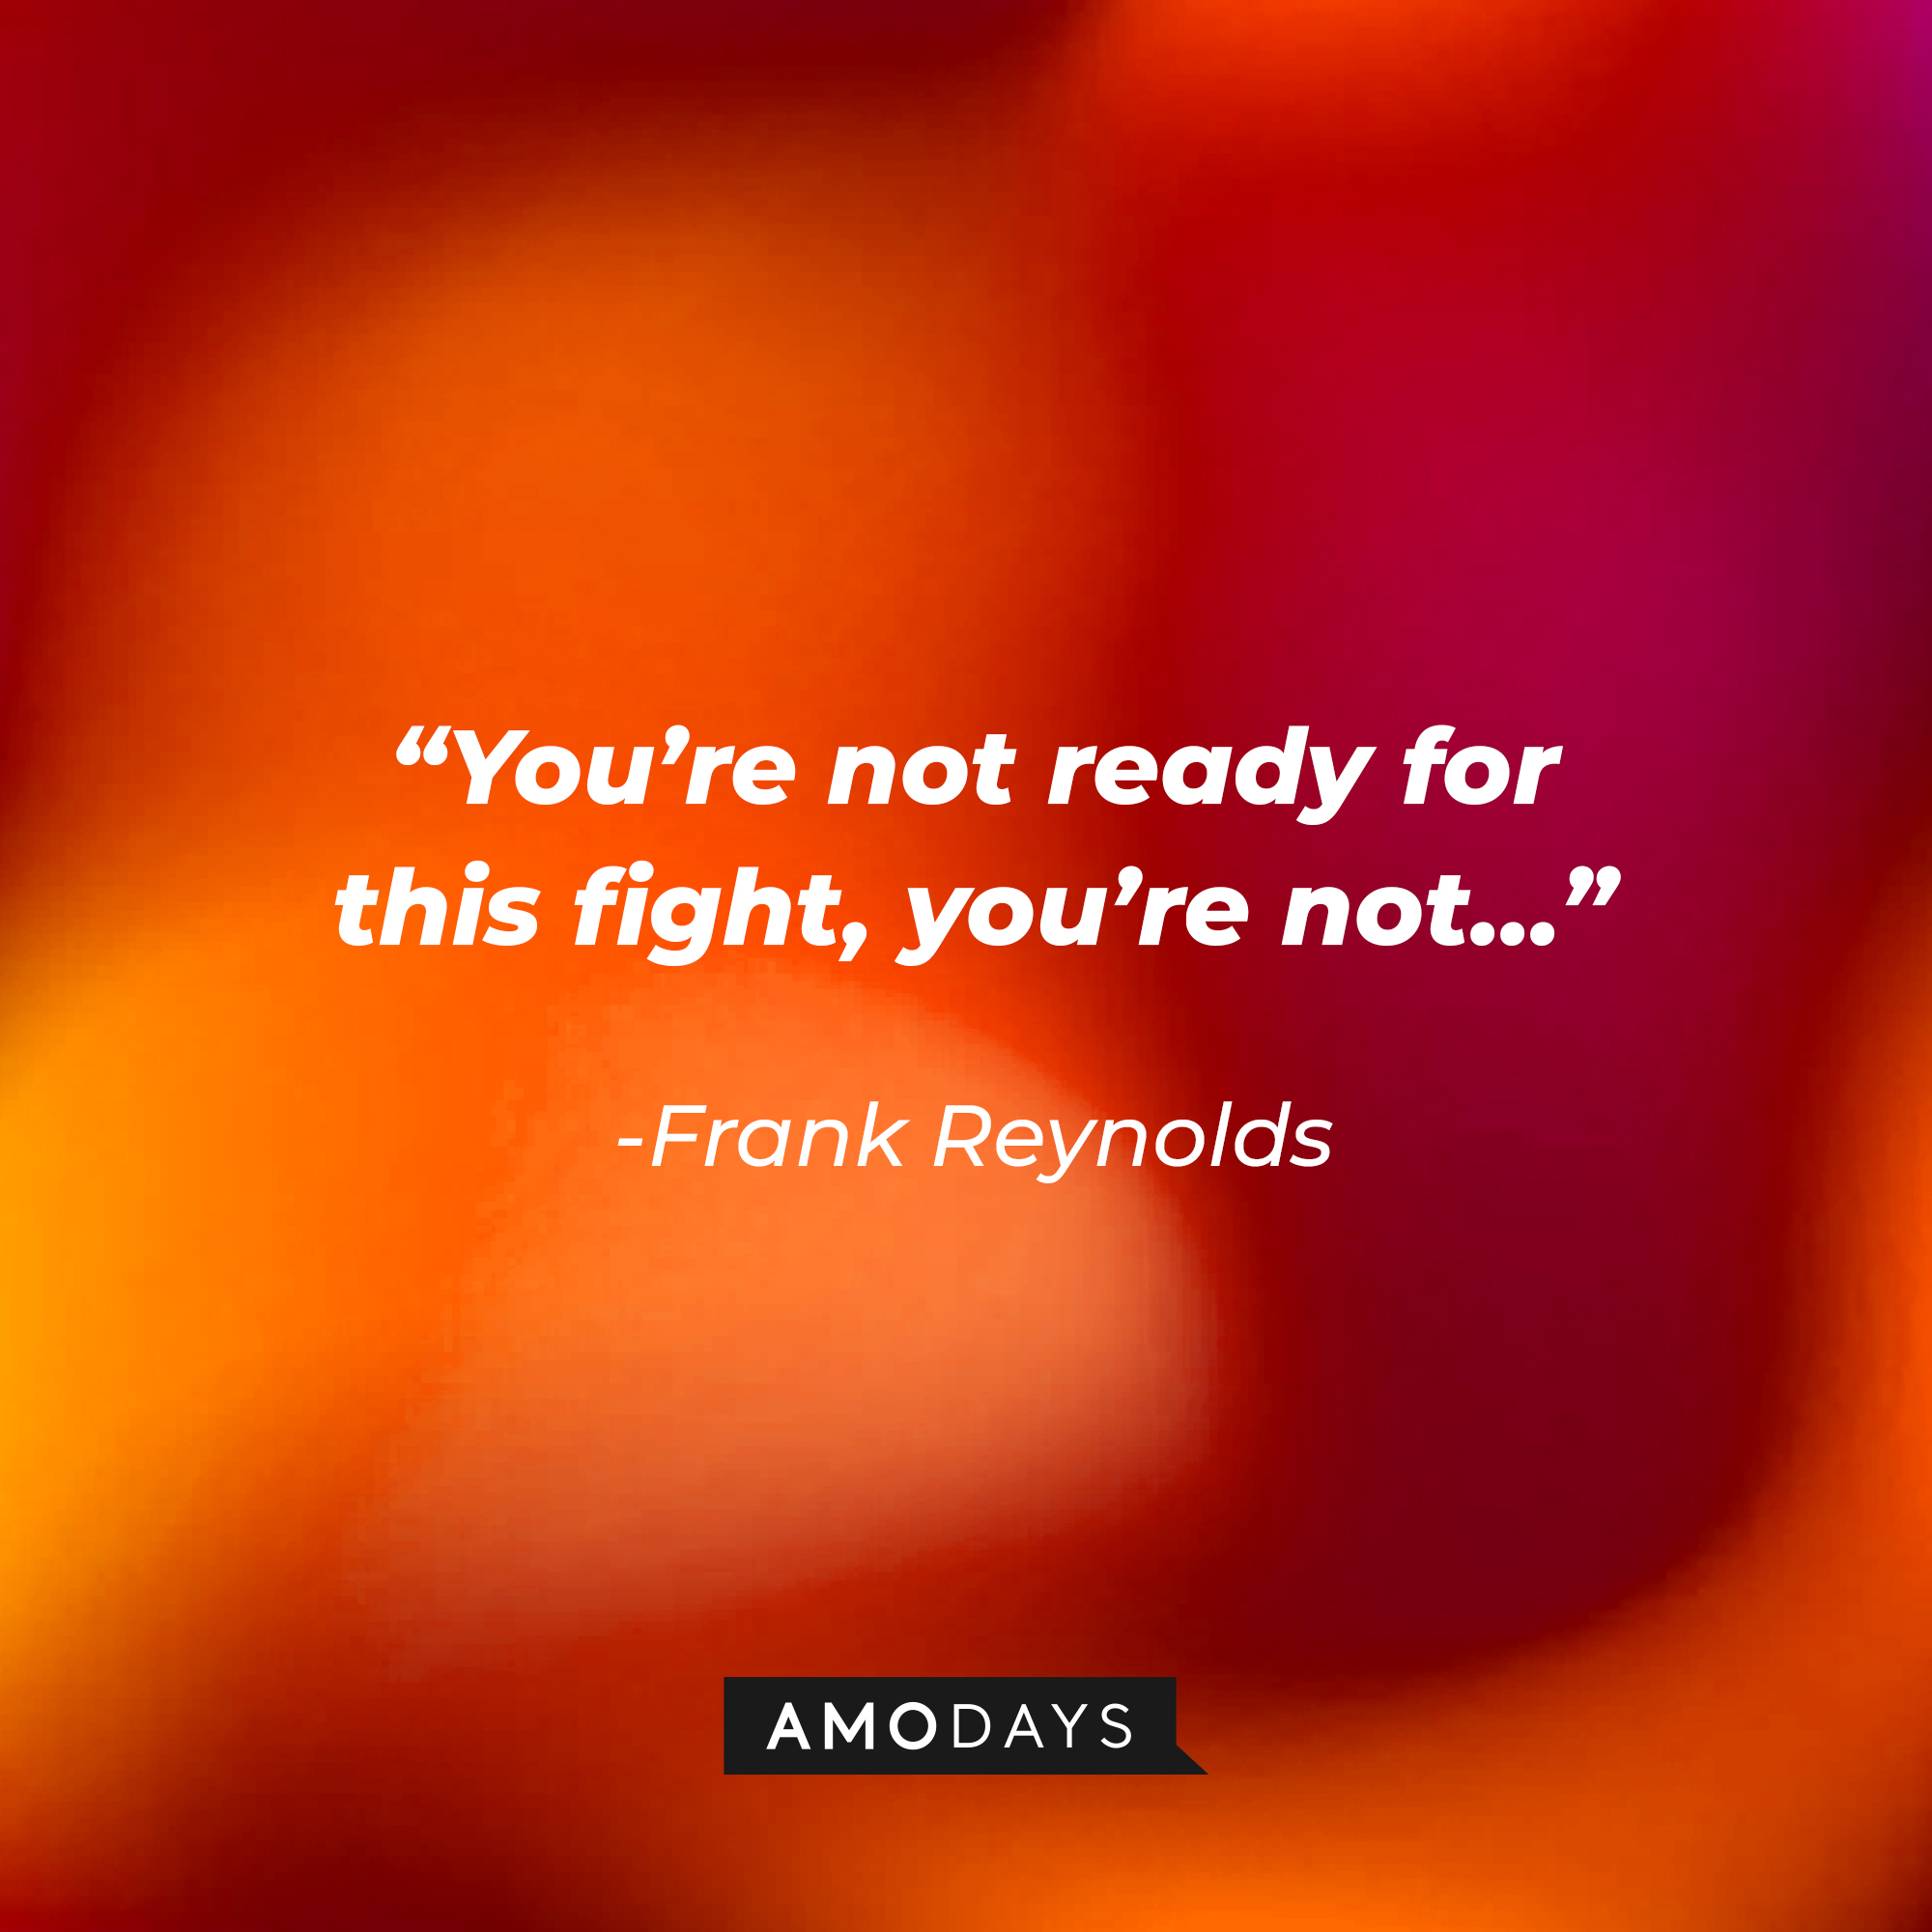 Frank Reynolds quote: “You’re not ready for this fight, you’re not…” | Source: facebook.com/alwayssunny